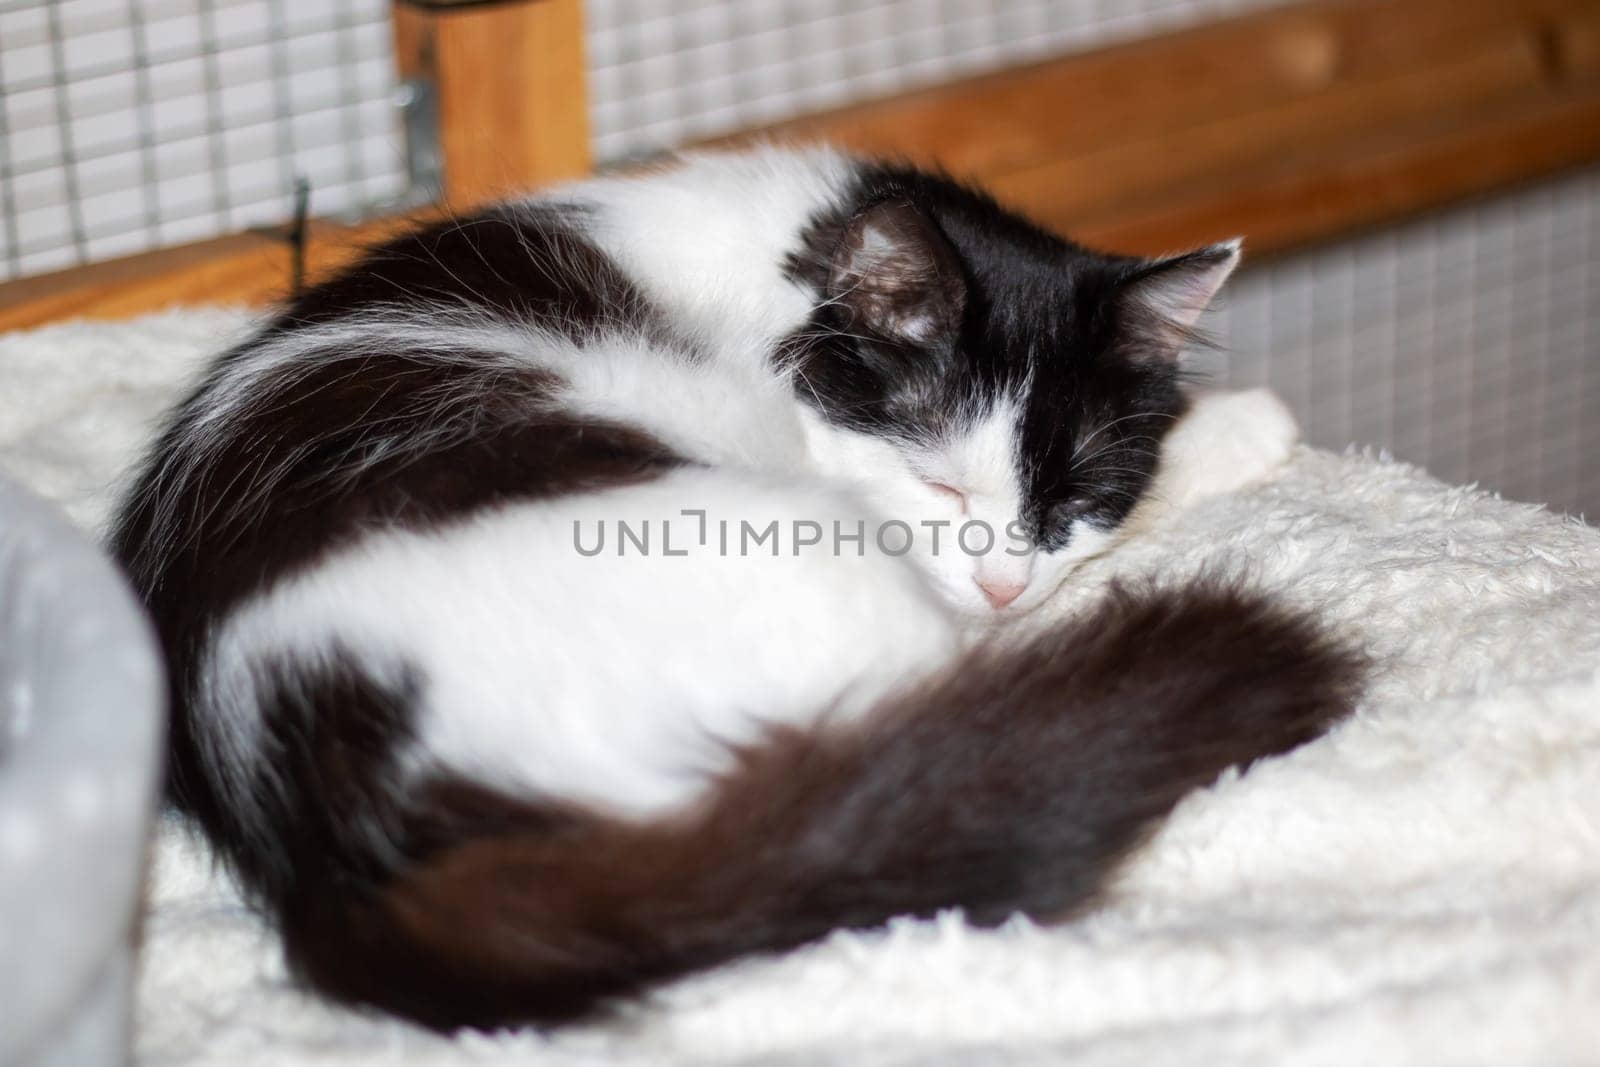 A domestic shorthaired black and white Cat, a member of the Felidae family, is peacefully sleeping on a soft white blanket, showcasing its whiskers, snout, and tail in a moment of comfort